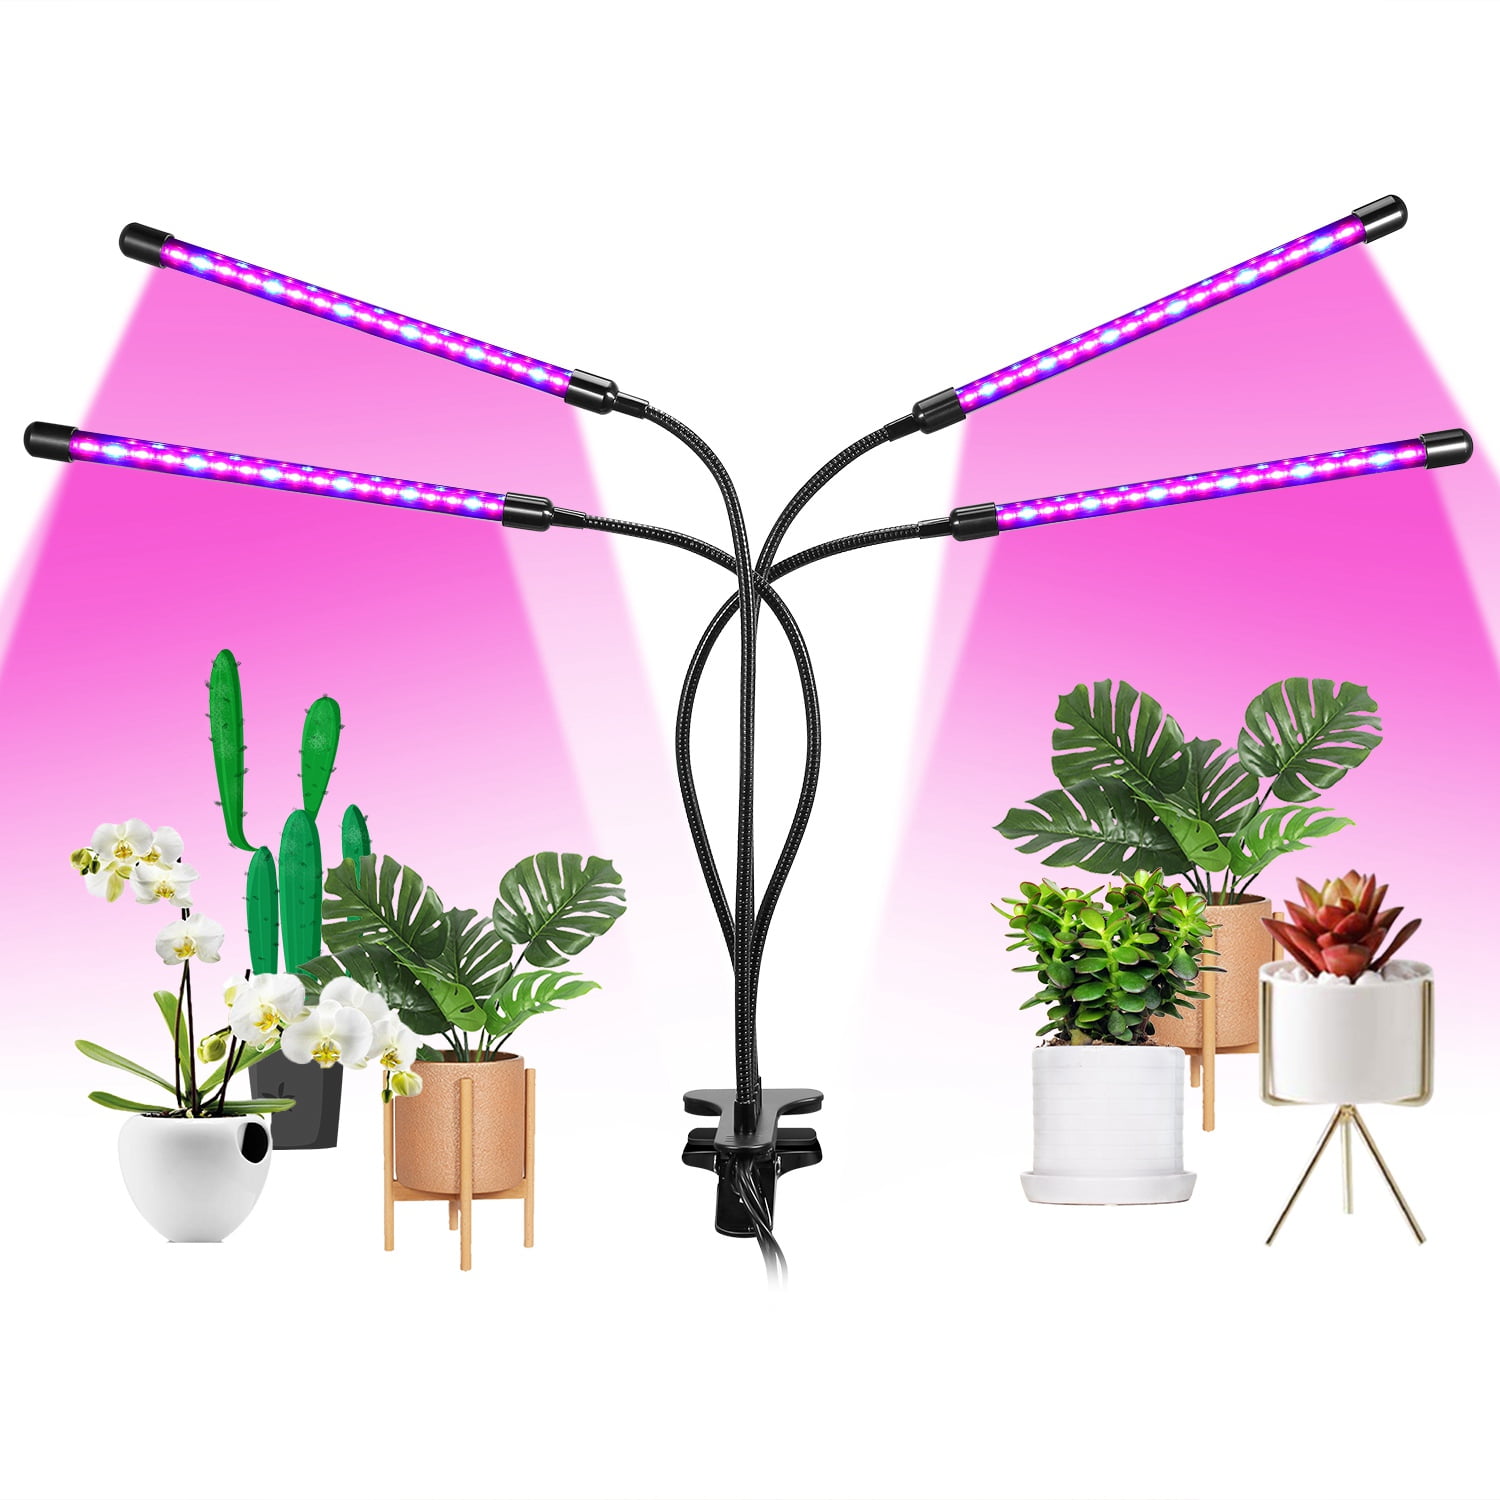 LED Grow Light Plant Growing Lamp LED Strip Lights For Indoor Plants Hydroponics 